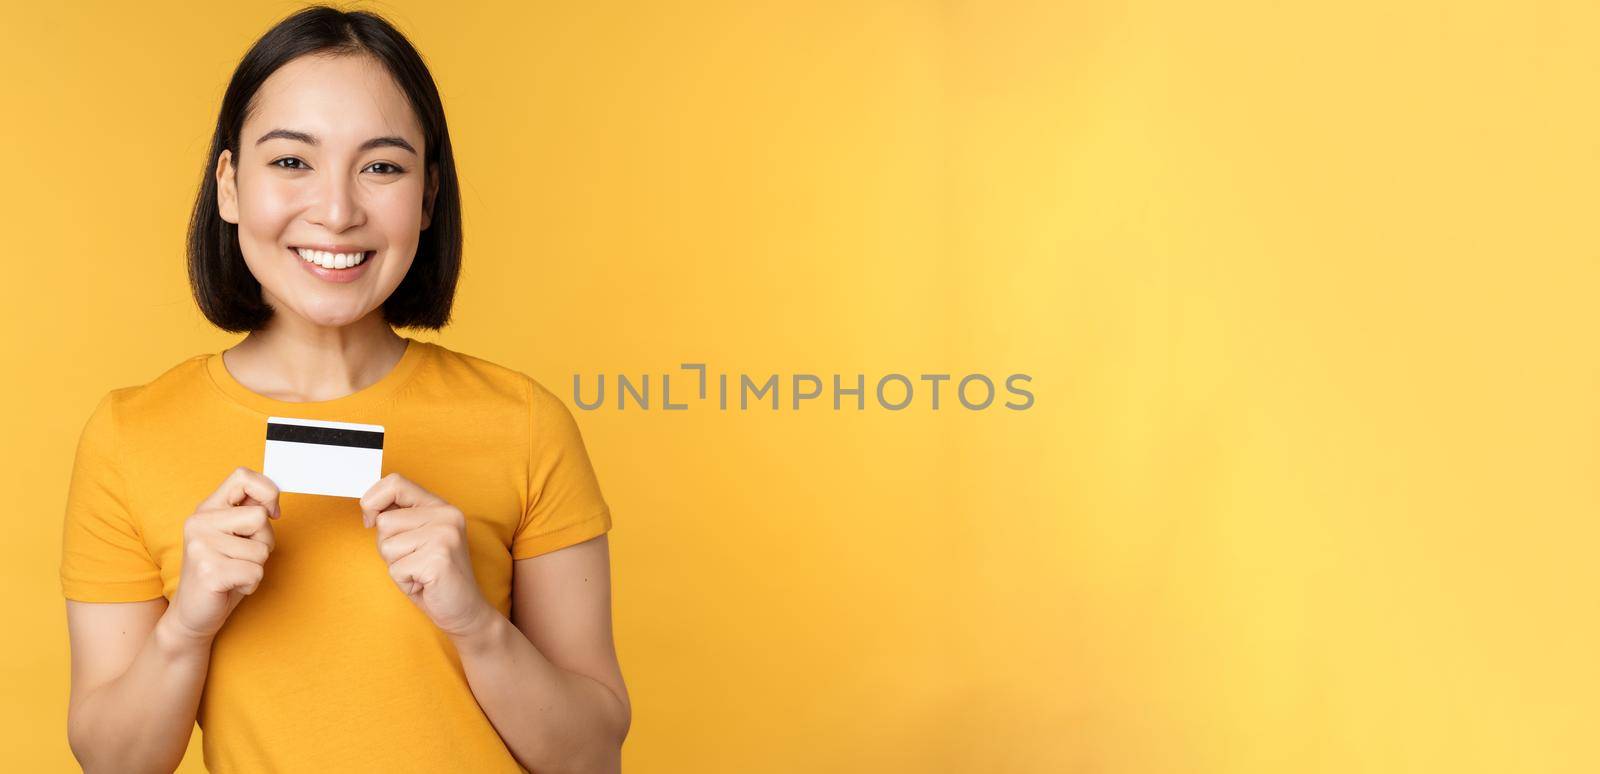 Beautiful asian woman showing credit card and smiling, recommending bank service, standing over yellow background. Copy space